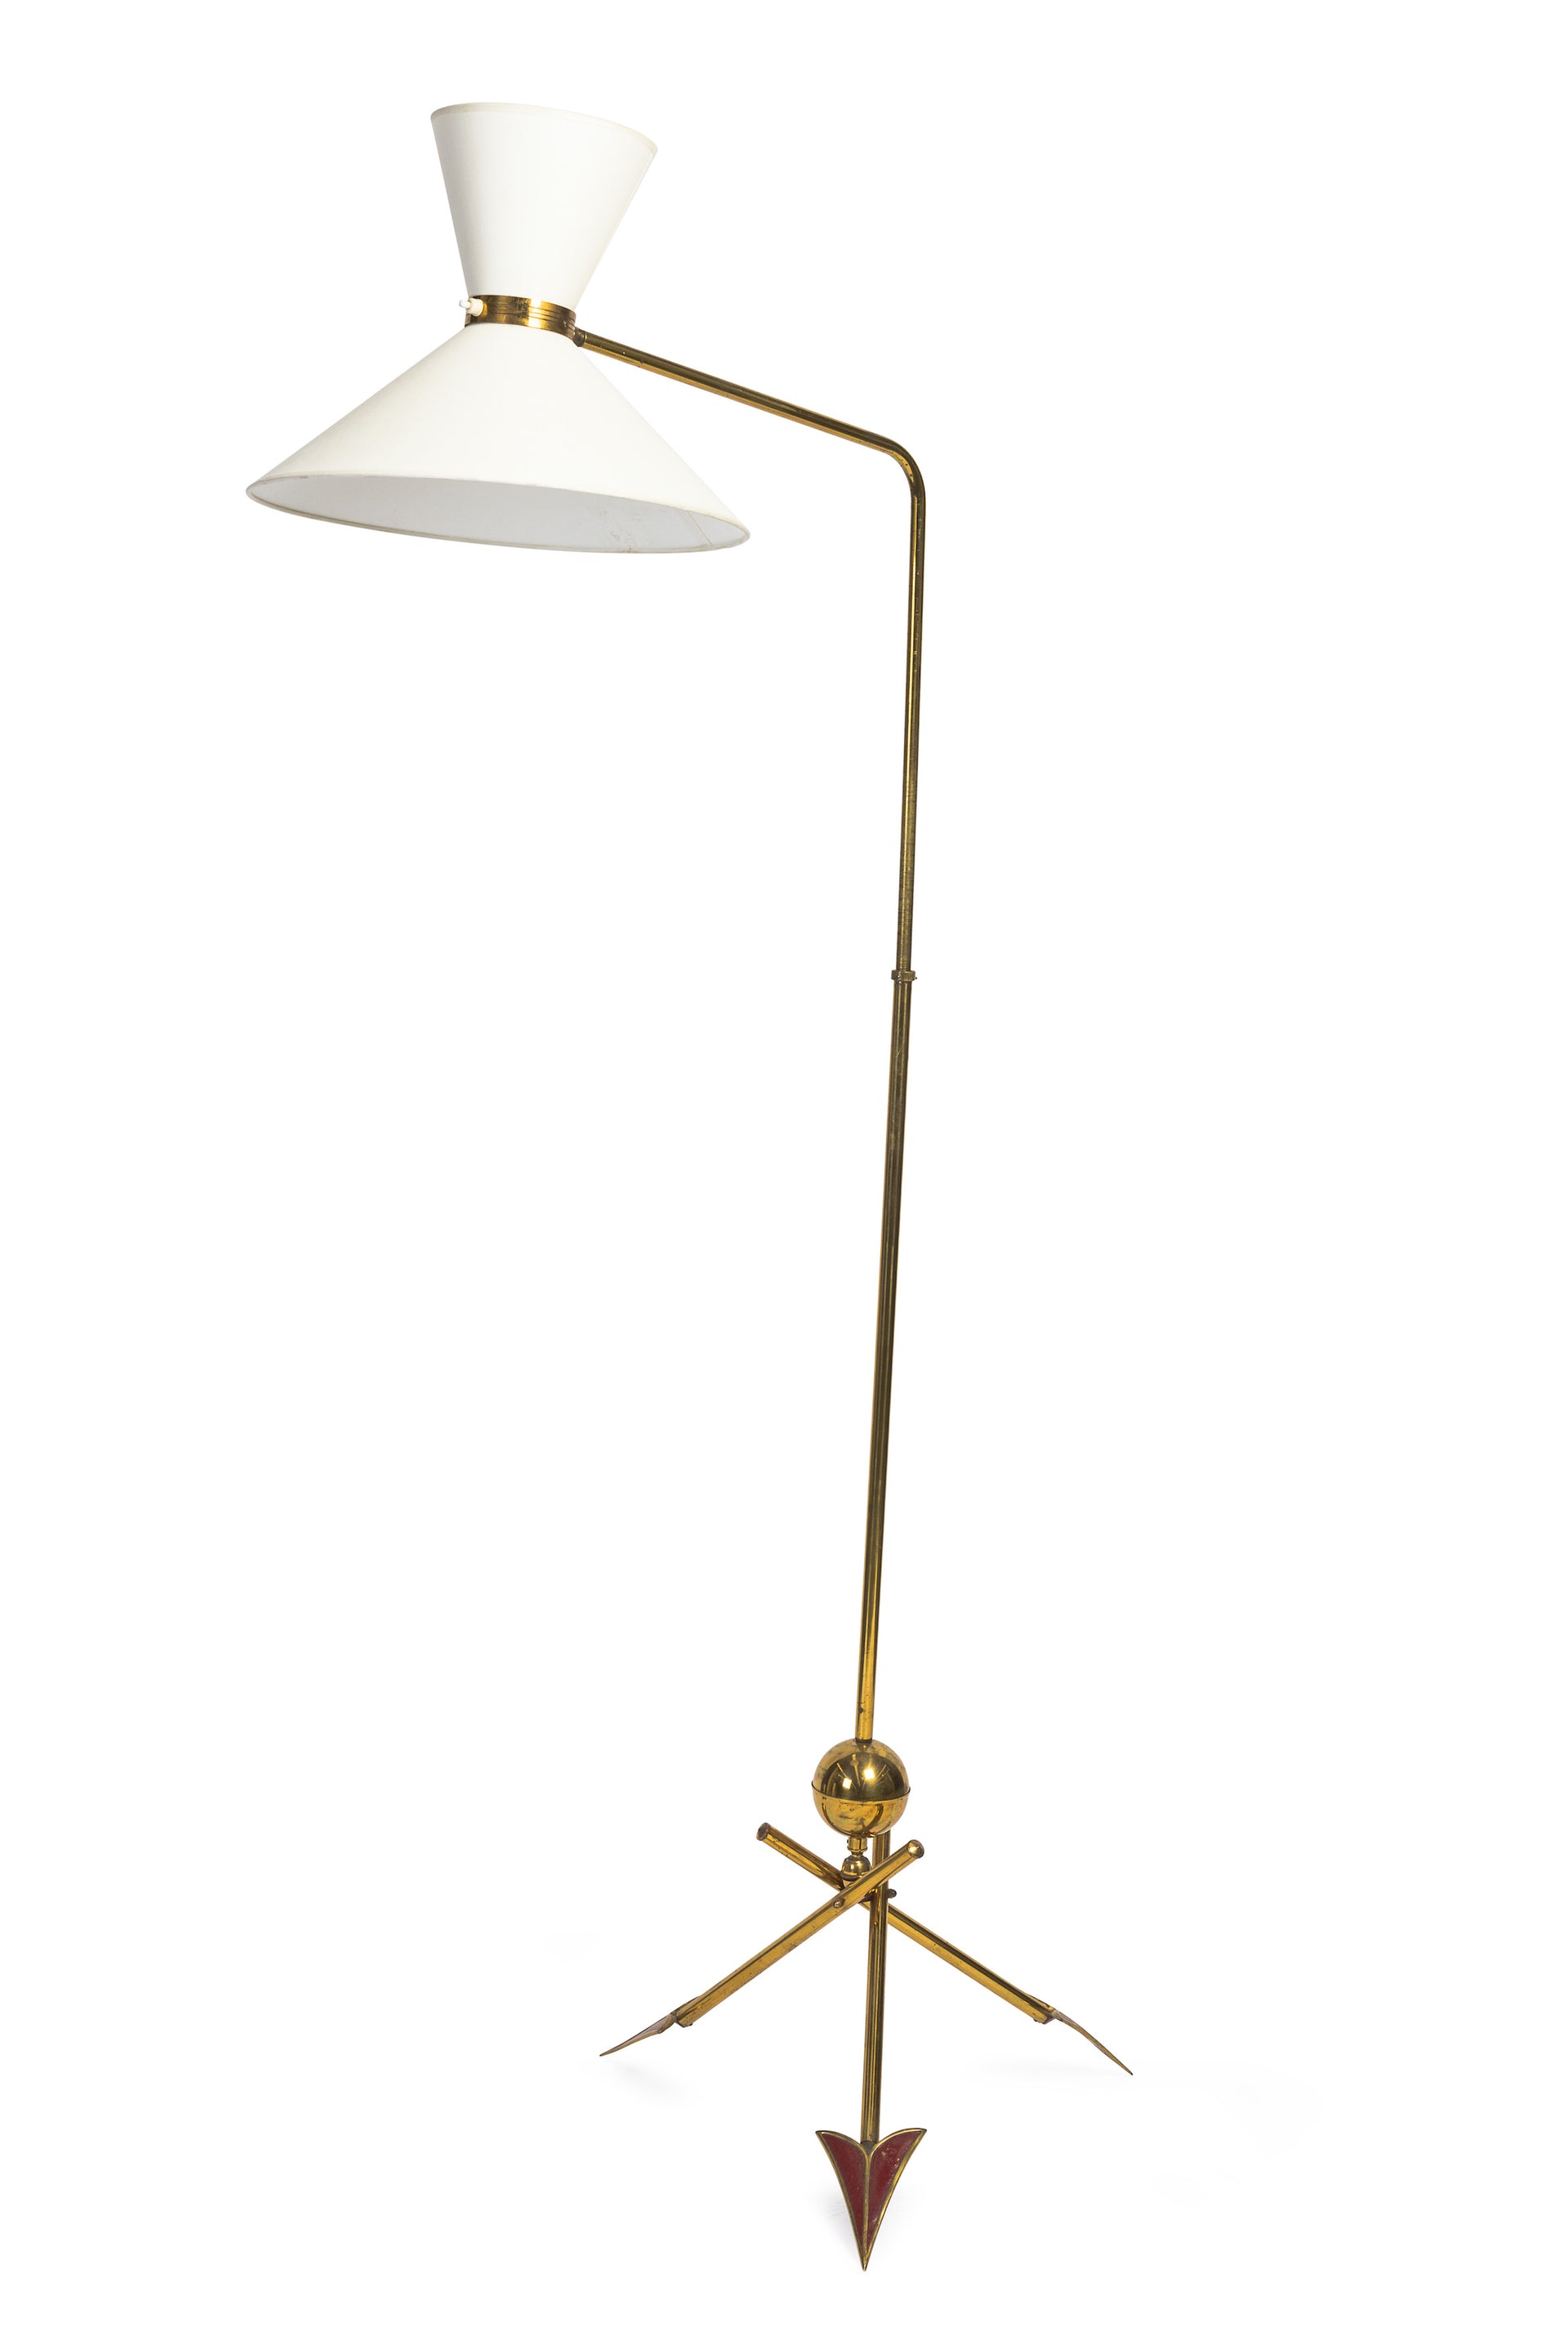 SOLD A stylish brass and red enamel arrow design floor lamp, French Circa 1950